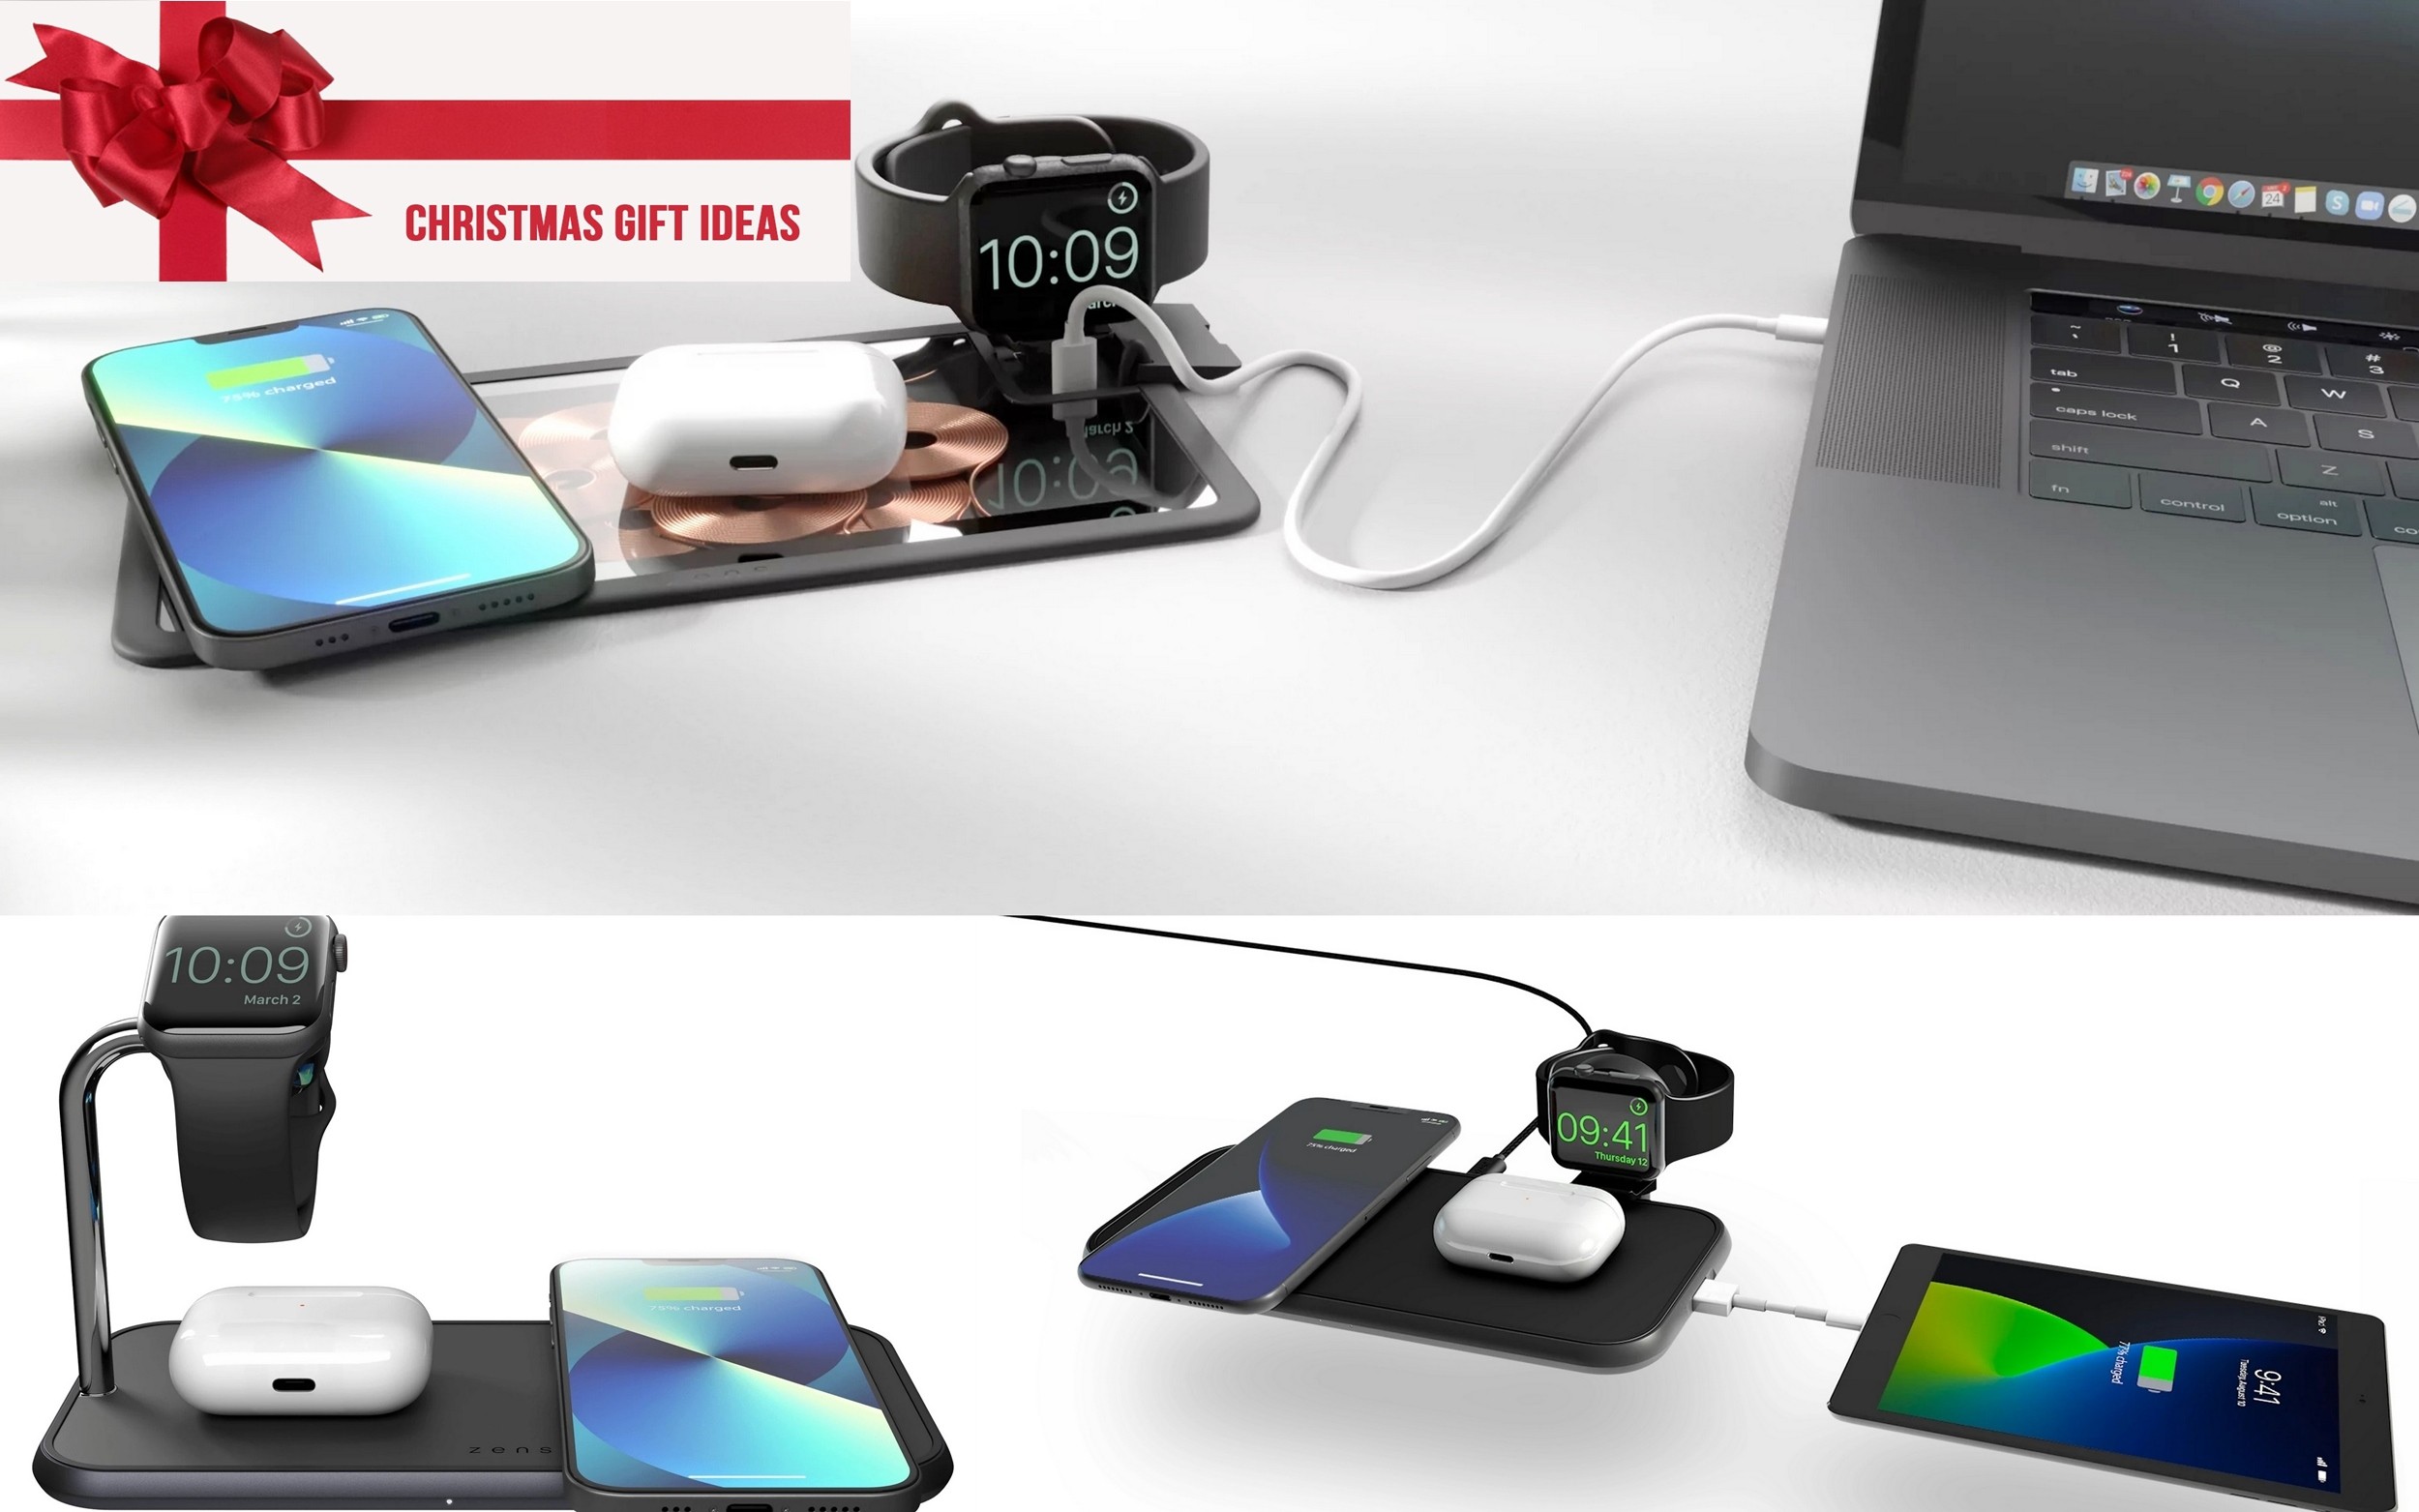 Zens Wireless Chargers: Freedom to Charge Wirelessly